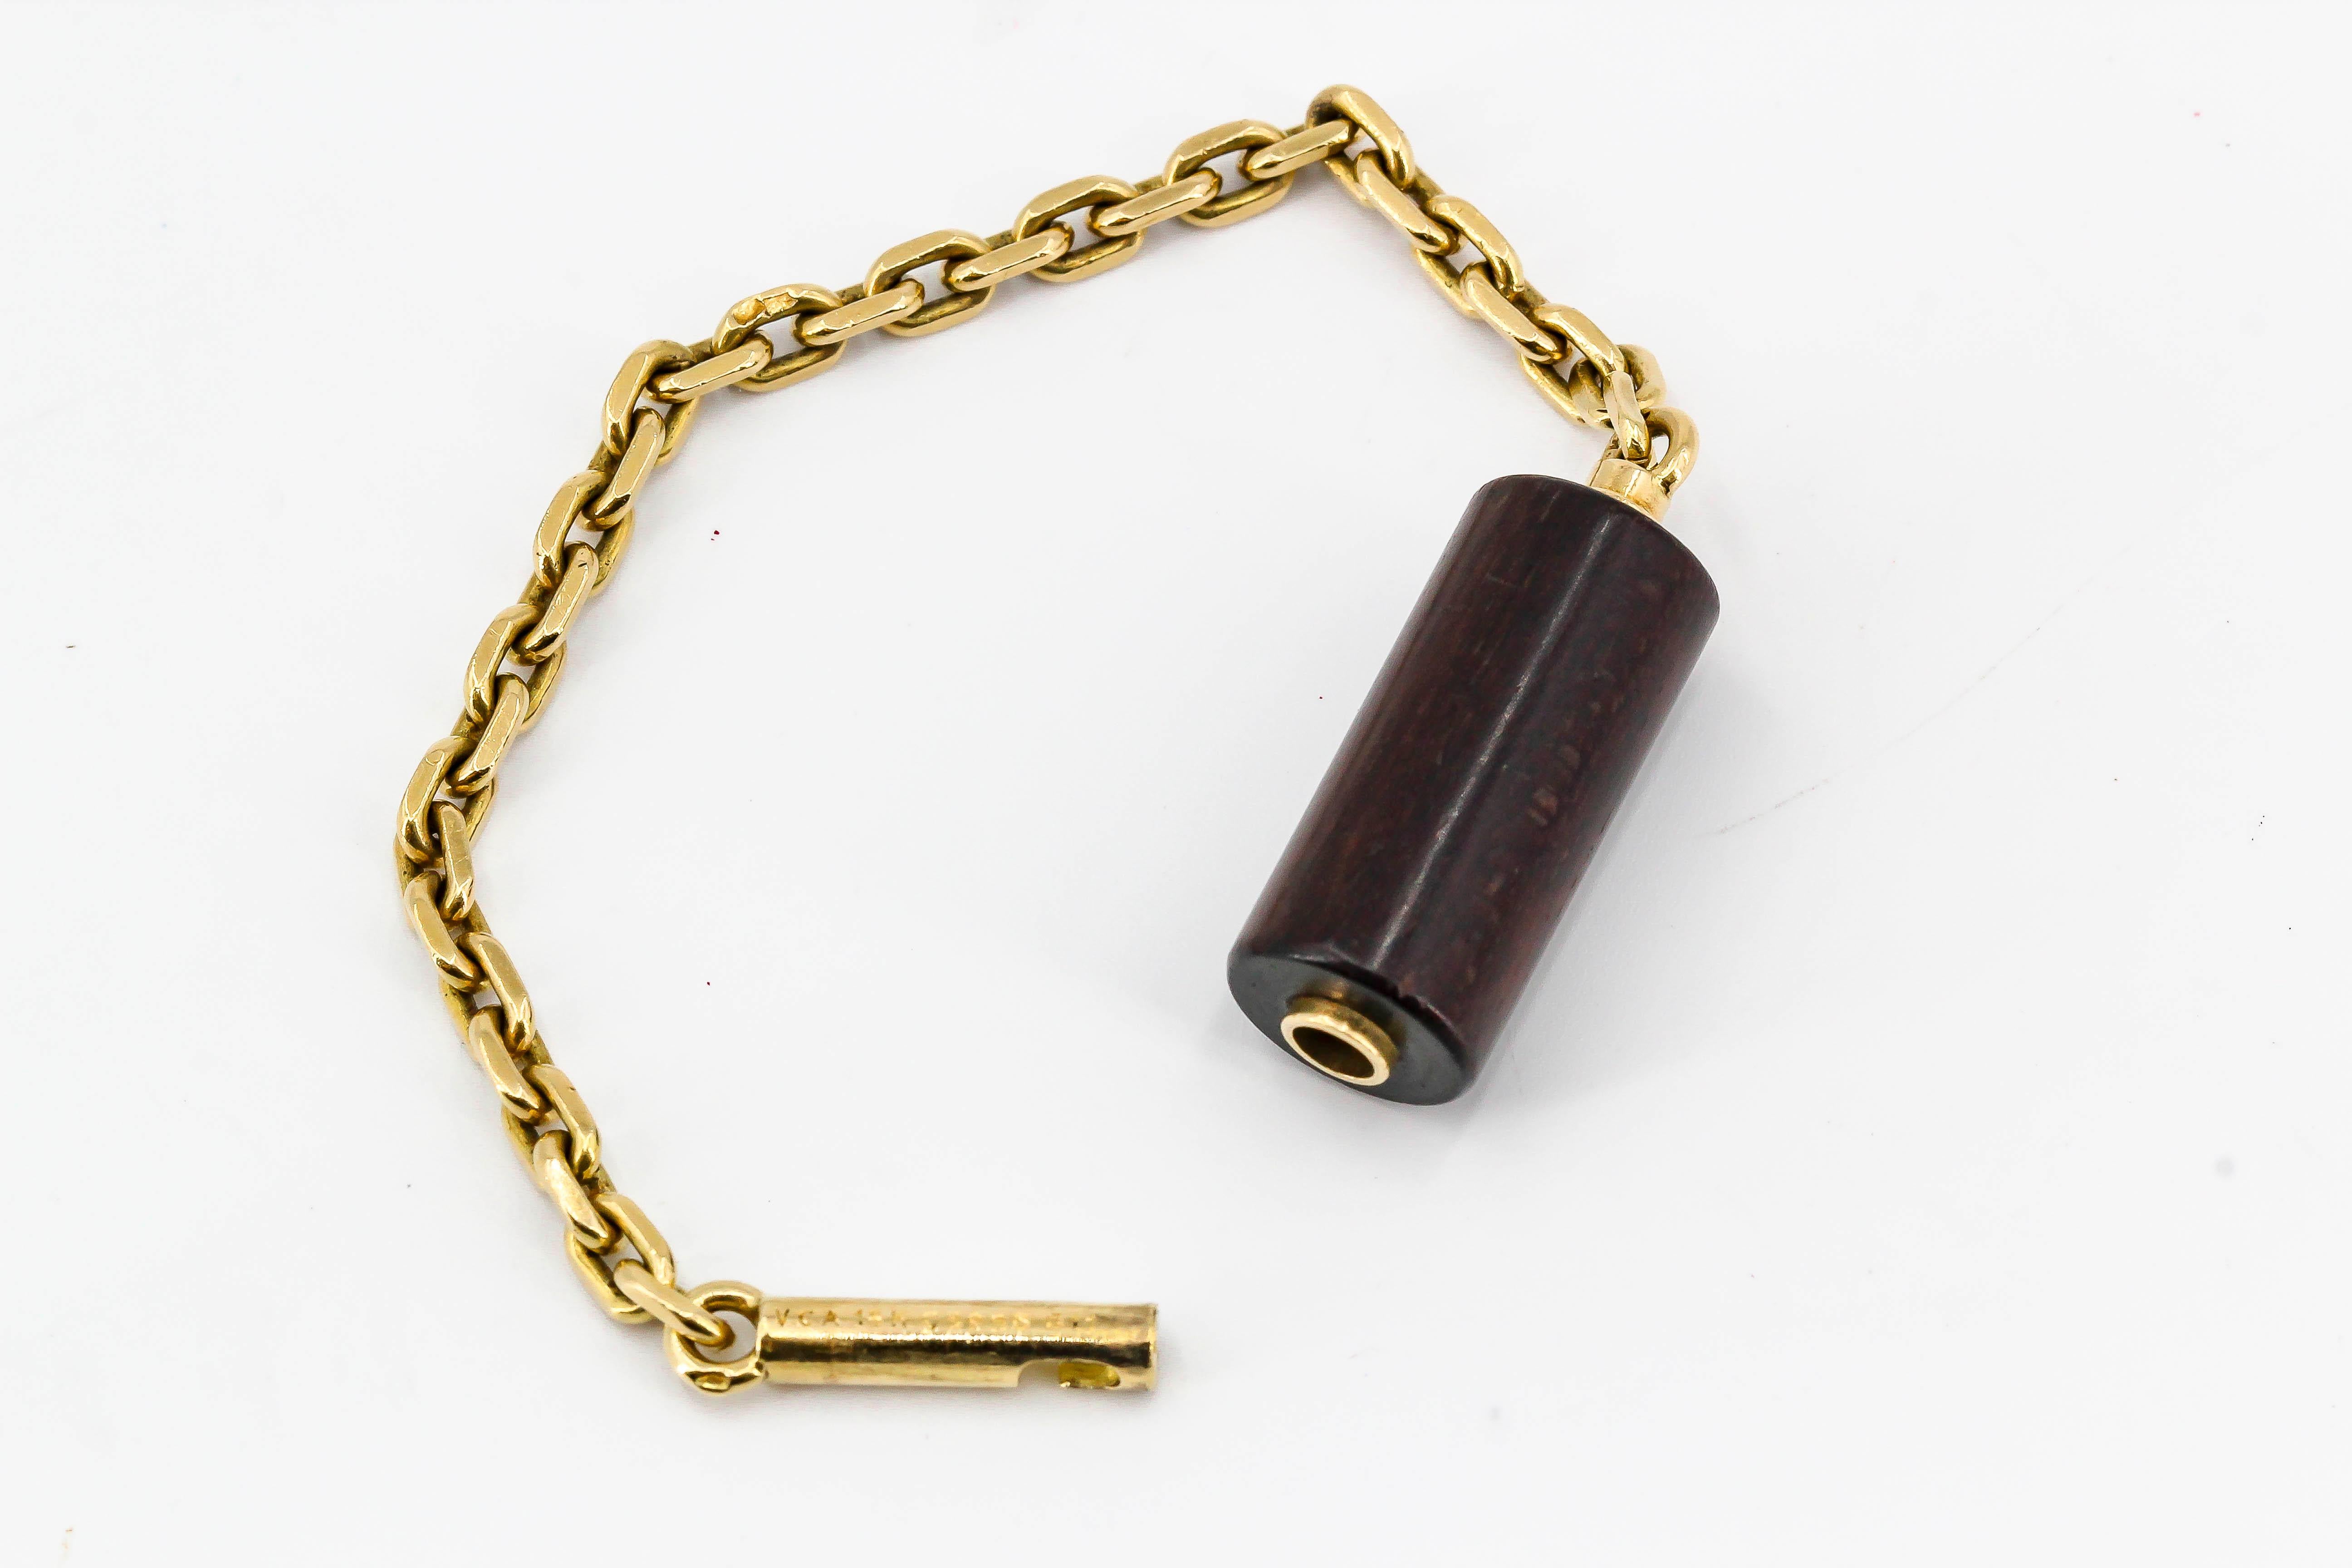 Rare and unusual 18K yellow gold and wood keychain by Van Cleef & Arpels. It features an 18K gold link chain with wood center section. Closure mechanism involves pushing one pin inside and turning it.

Hallmarks: VCA, French 18K gold assay mark,